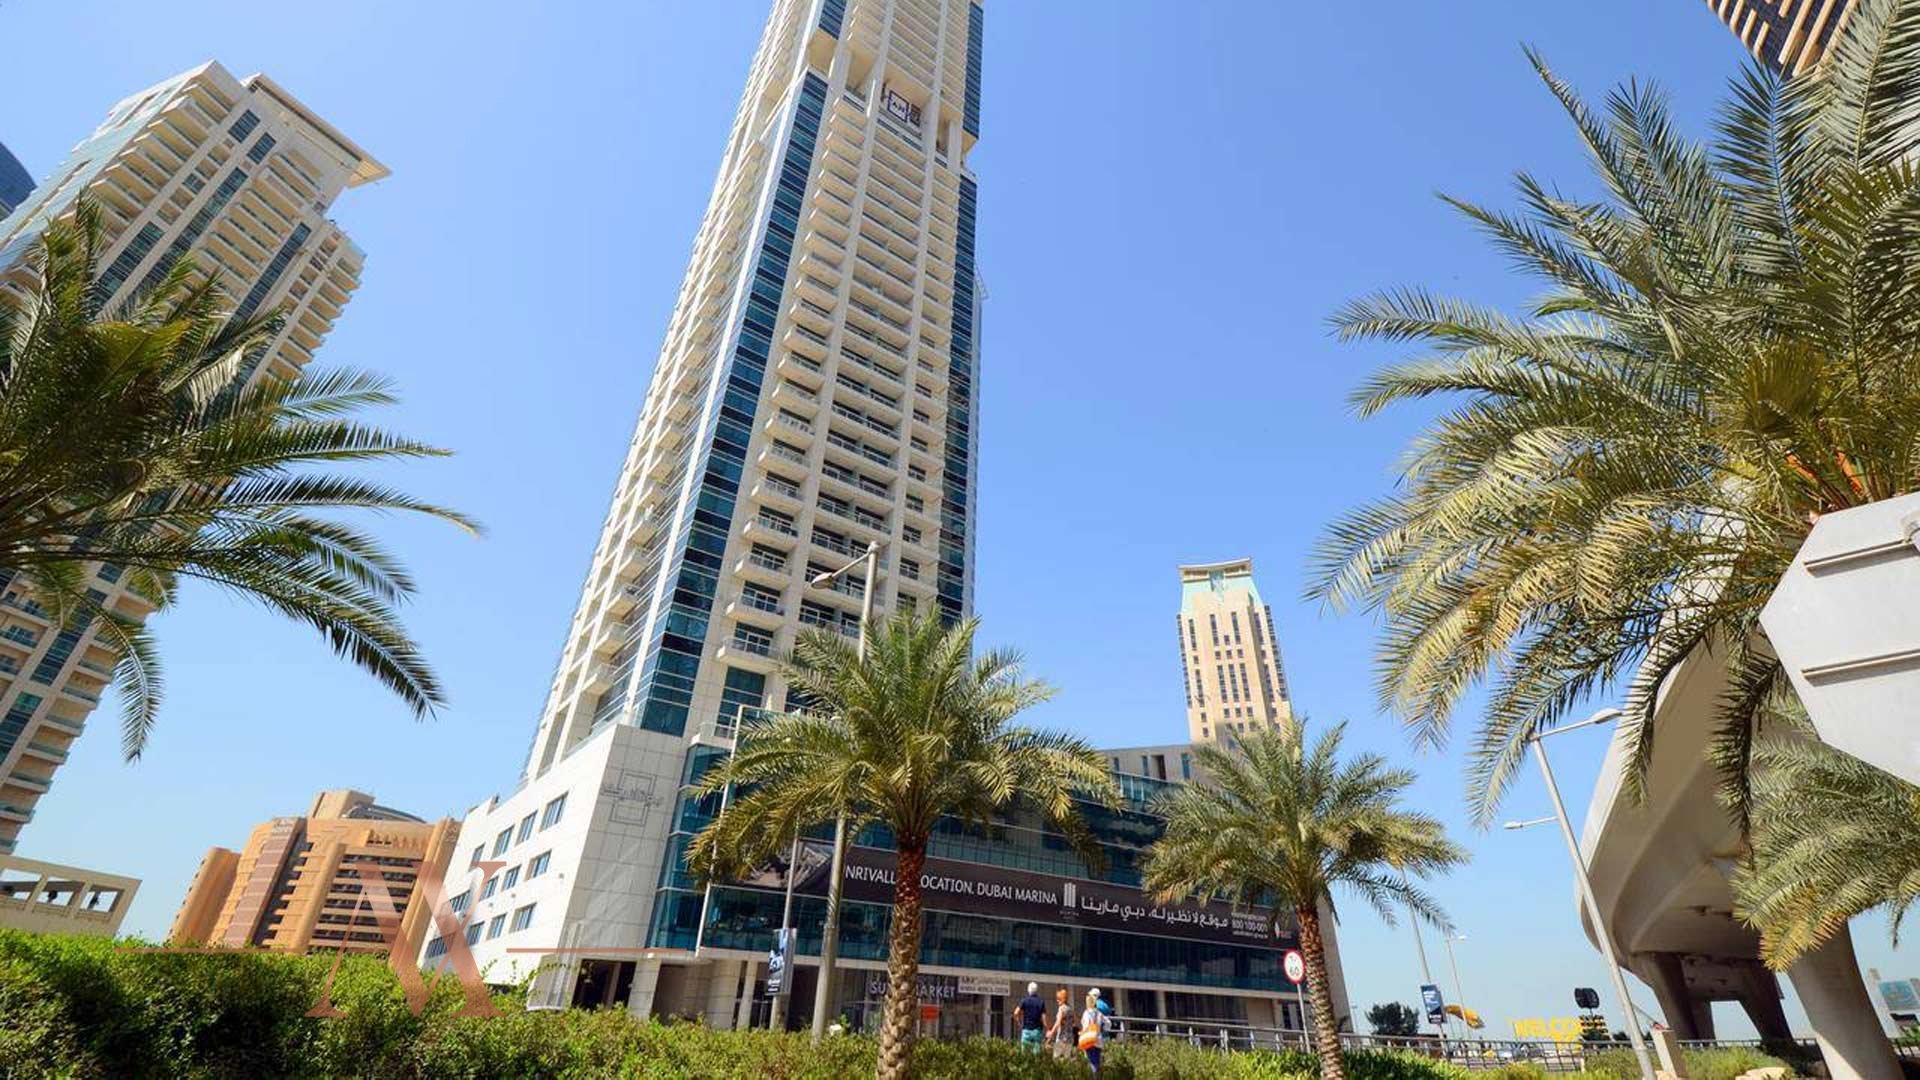 BOTANICA TOWER property for sale with Bitcoin & Cryptocurrency - 1